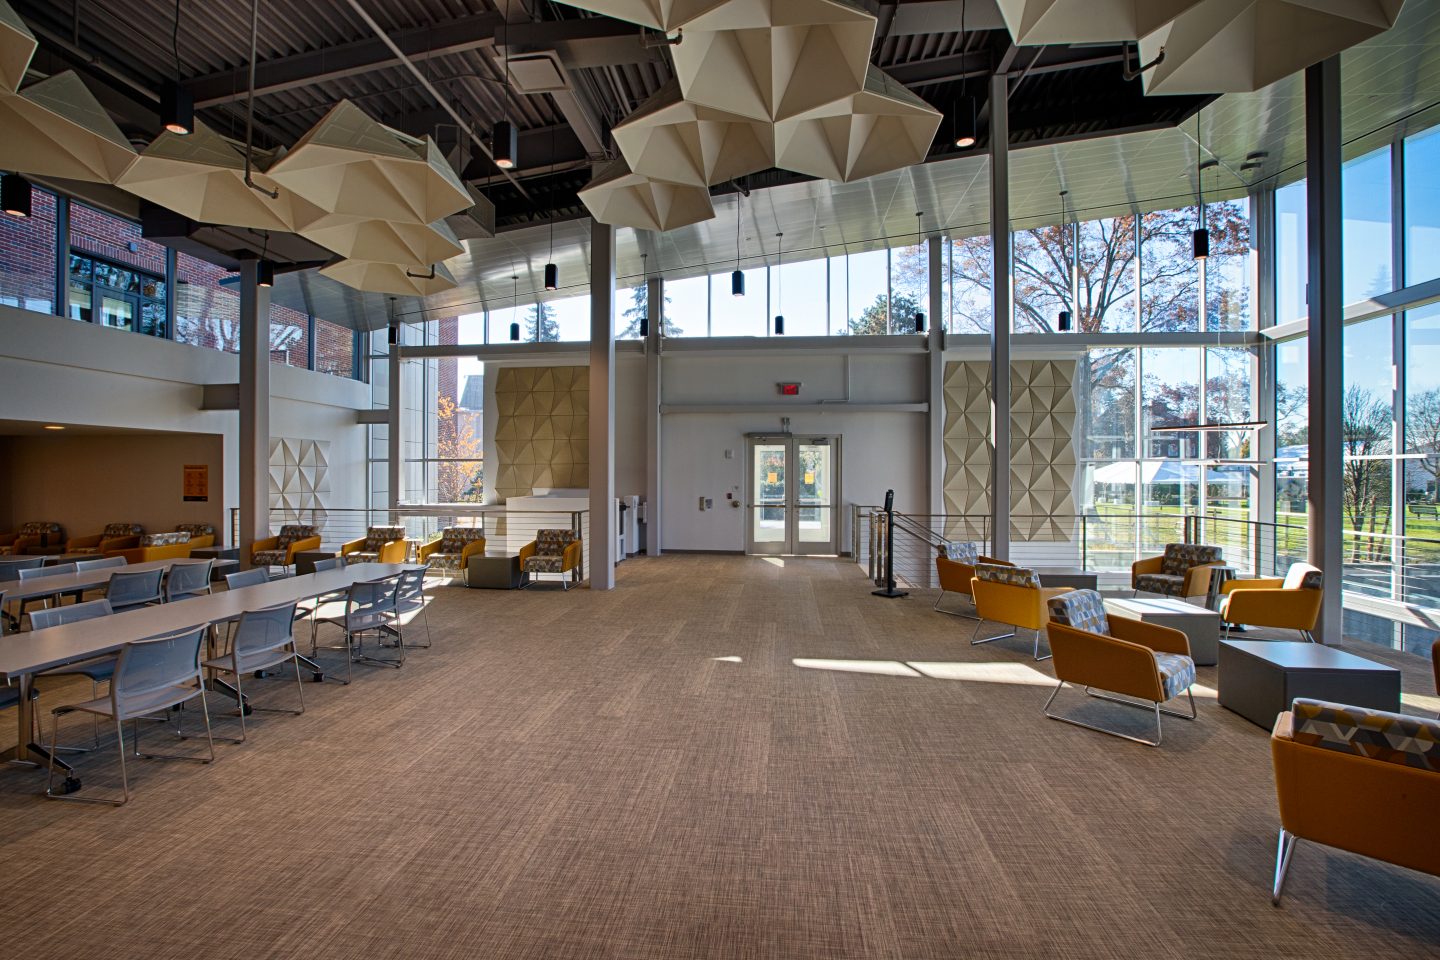 Seating space in the main lobby area of the UC - first floor